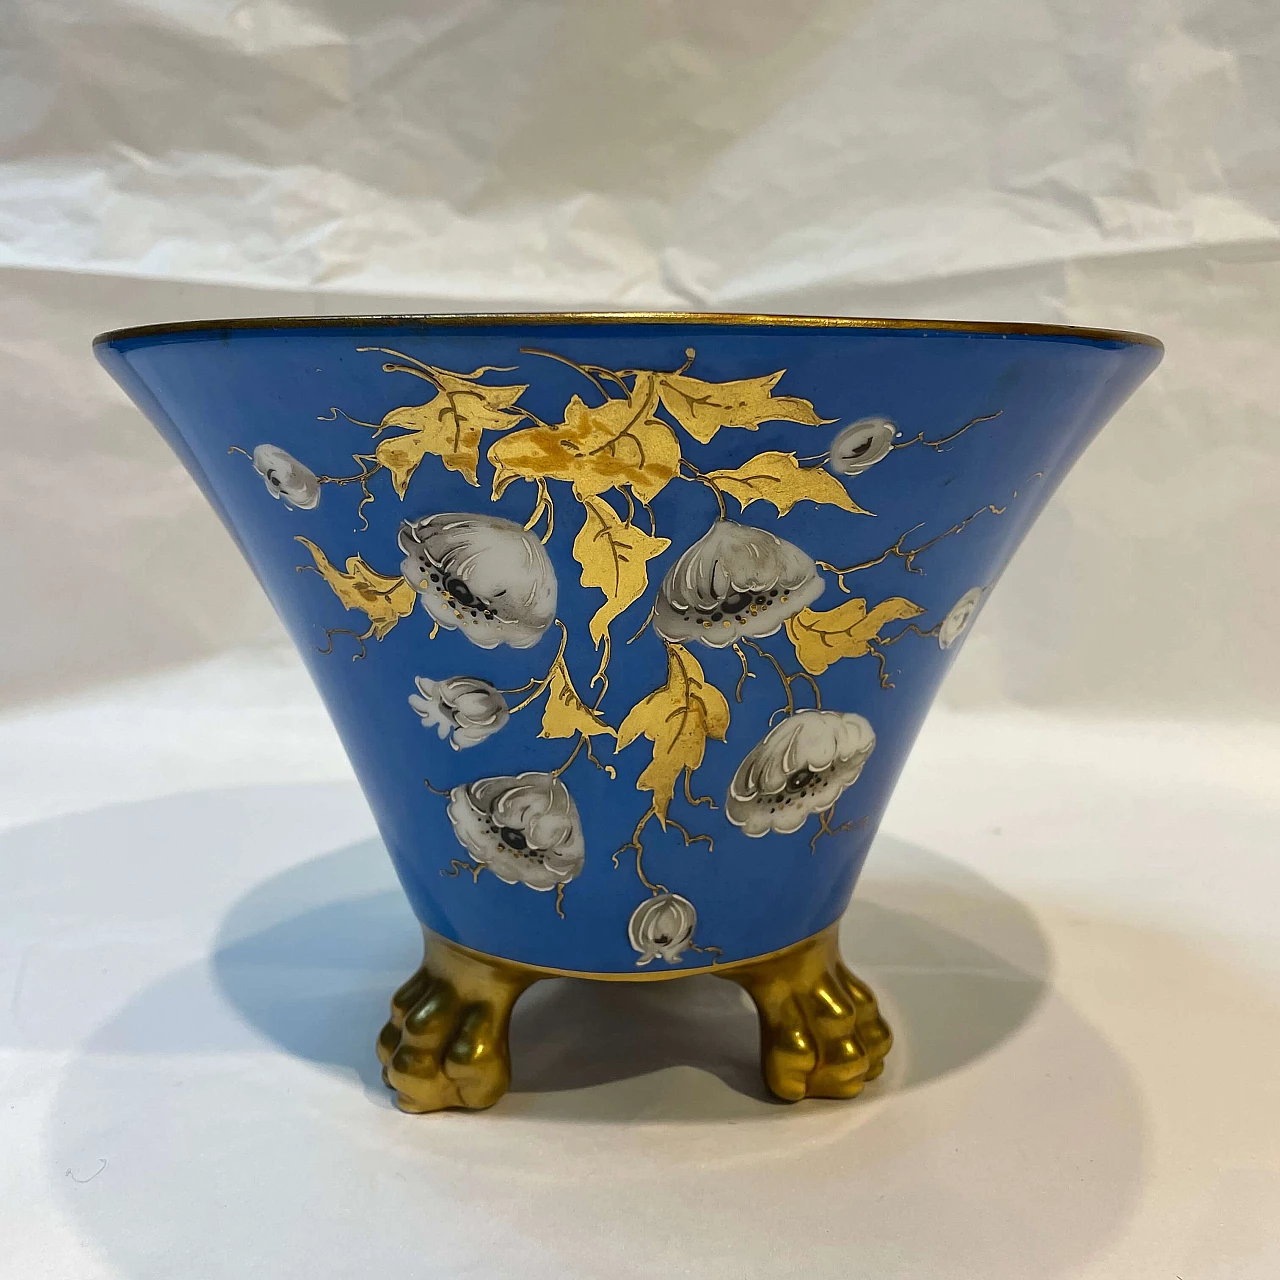 Blue ceramic vase with white flowers and golden leaves decorations, 1940s 1